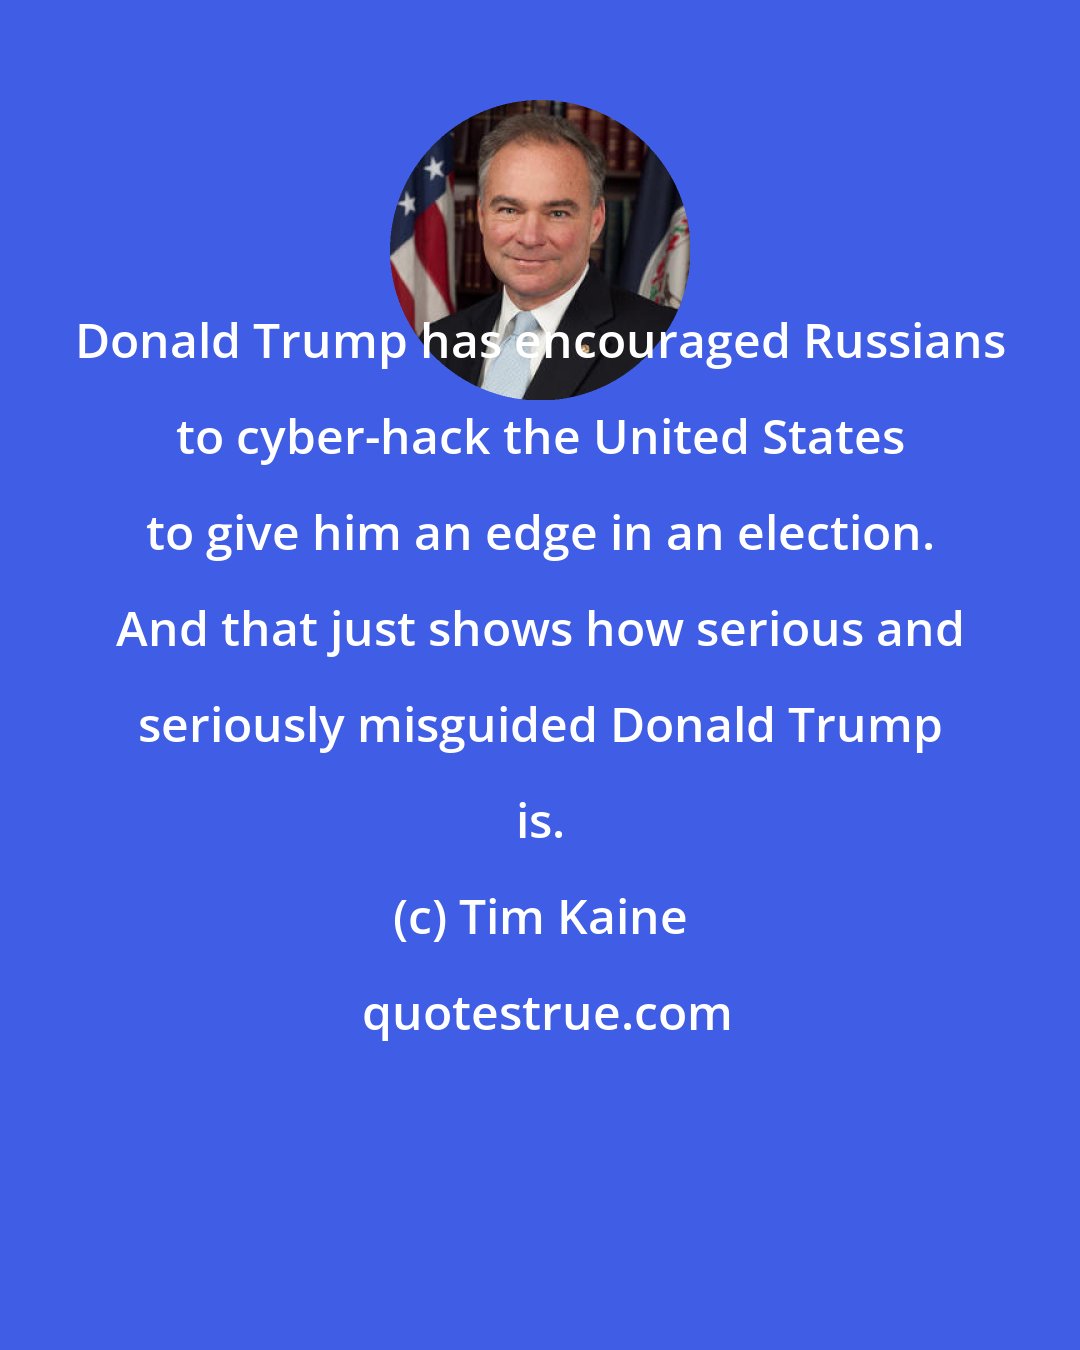 Tim Kaine: Donald Trump has encouraged Russians to cyber-hack the United States to give him an edge in an election. And that just shows how serious and seriously misguided Donald Trump is.